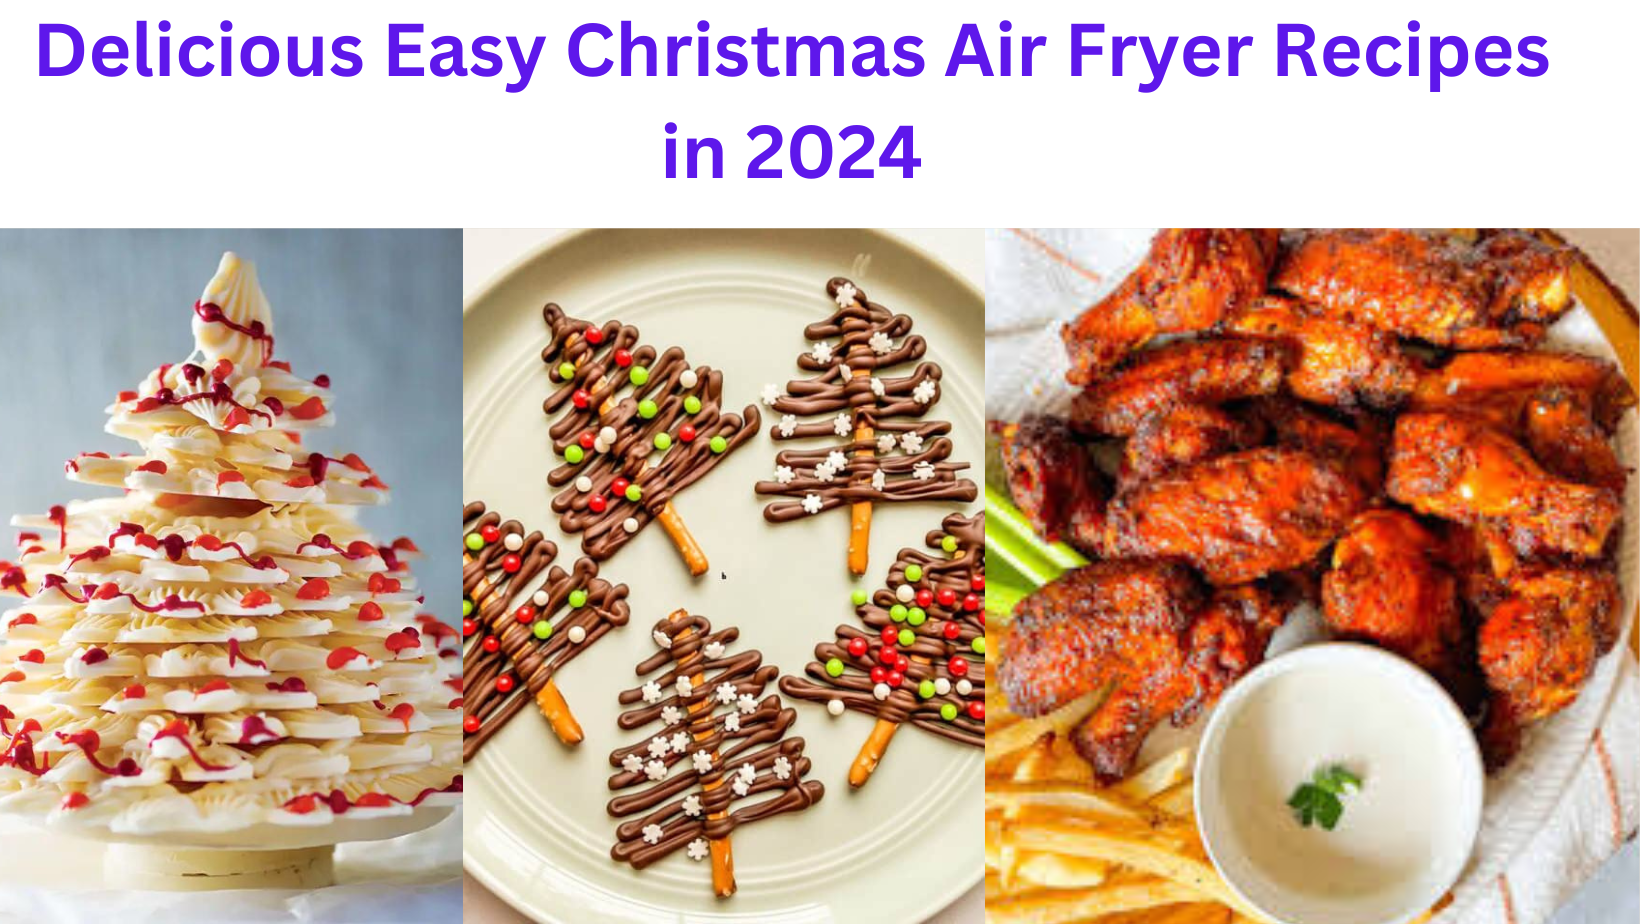 Delicious Easy Christmas Air Fryer Recipes in 2024